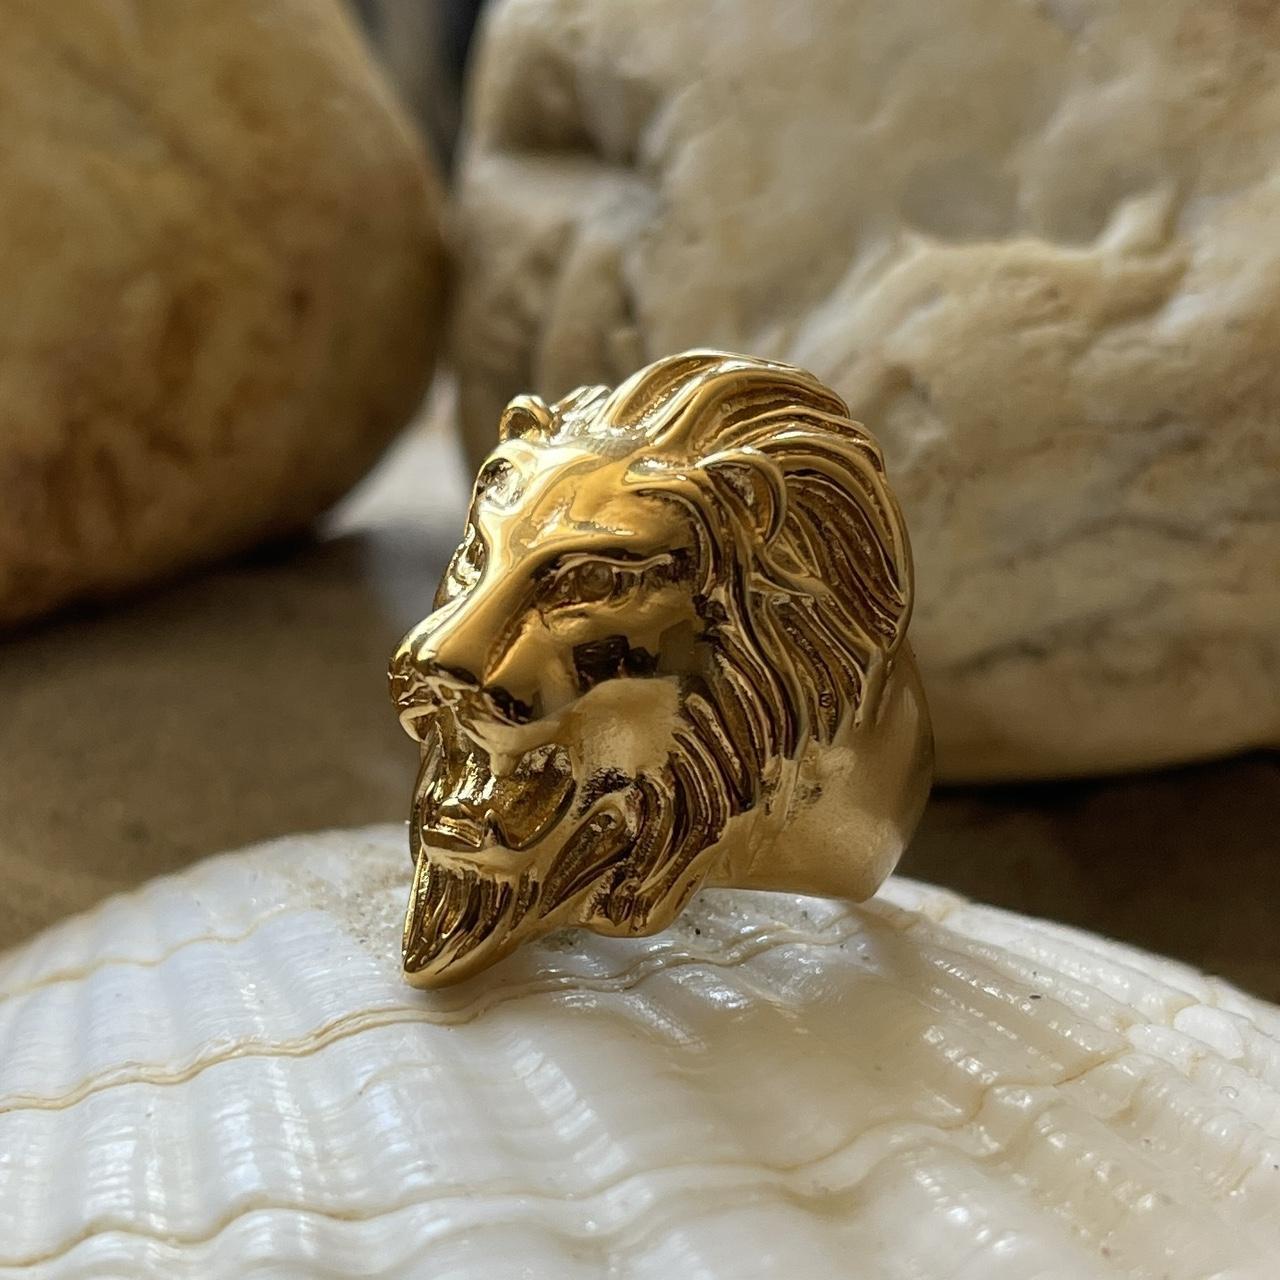 Buy Lion Ring for Men Forest King Lion Golden Ring Great Gift Item For  Birthday, Anniversary BY RIDDHI SIDDHI (16) at Amazon.in